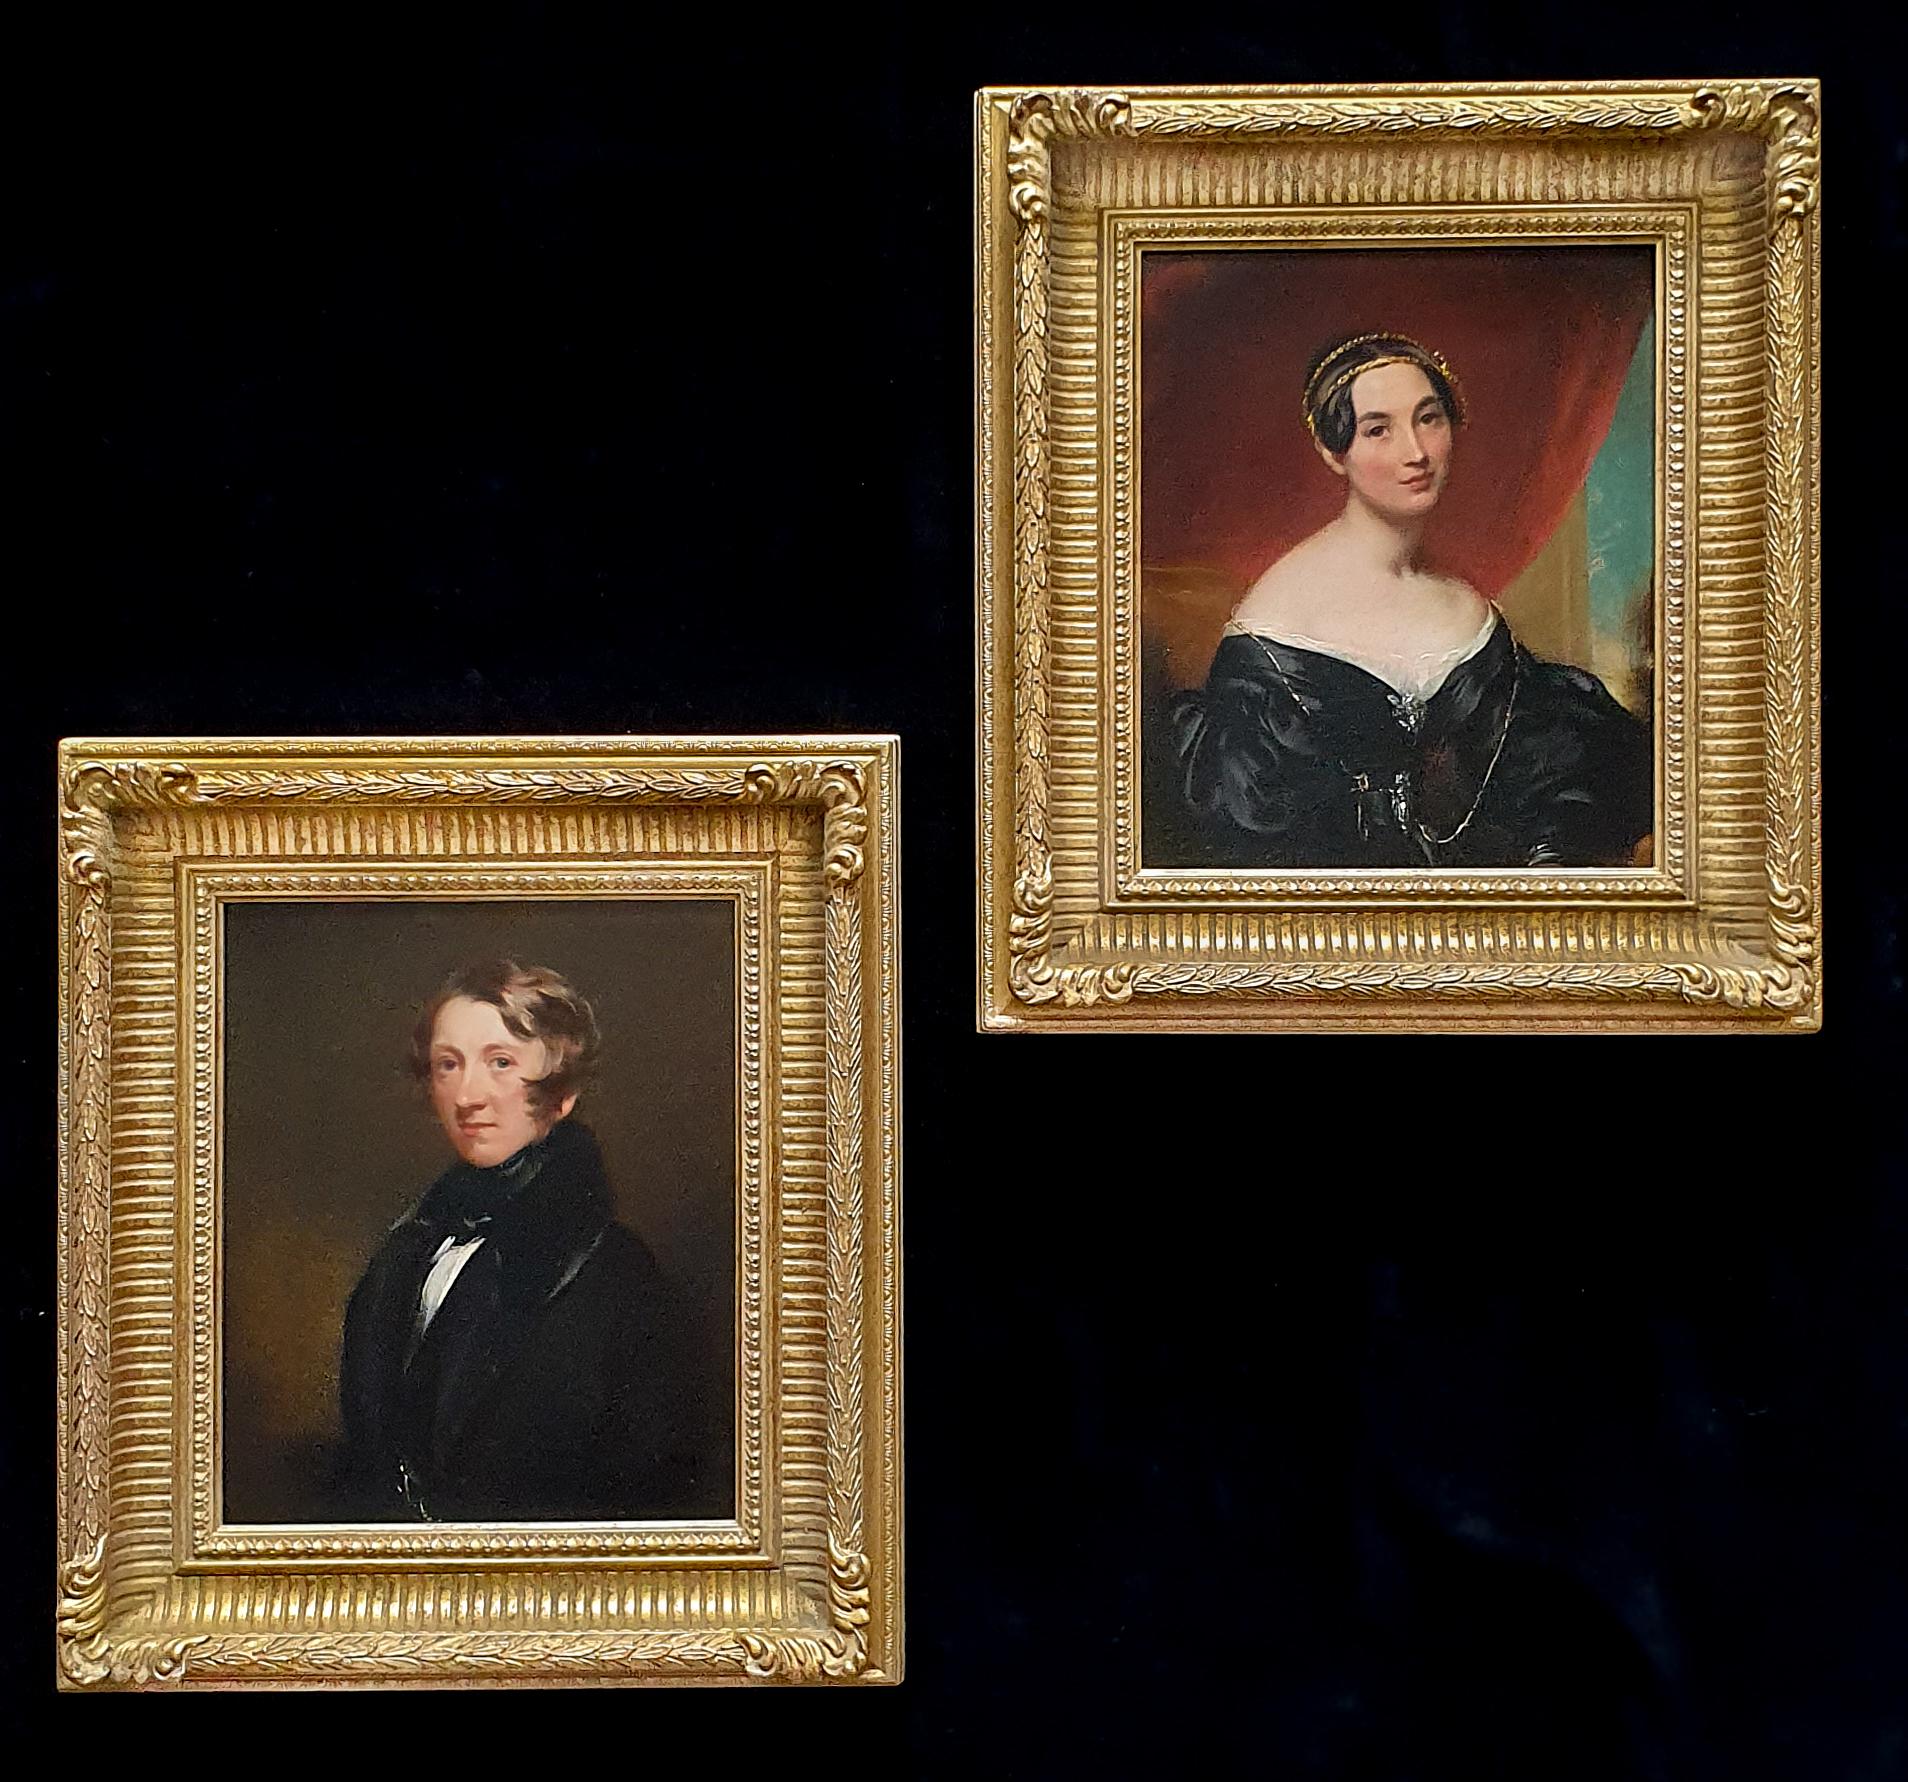 This sensitive and well observed portrait of a lady and portrait of a gentleman, perhaps painted at the time of their betrothal, are charming and insightful images of the growing wealth of society.  The portraits are ascribed with the artist’s home